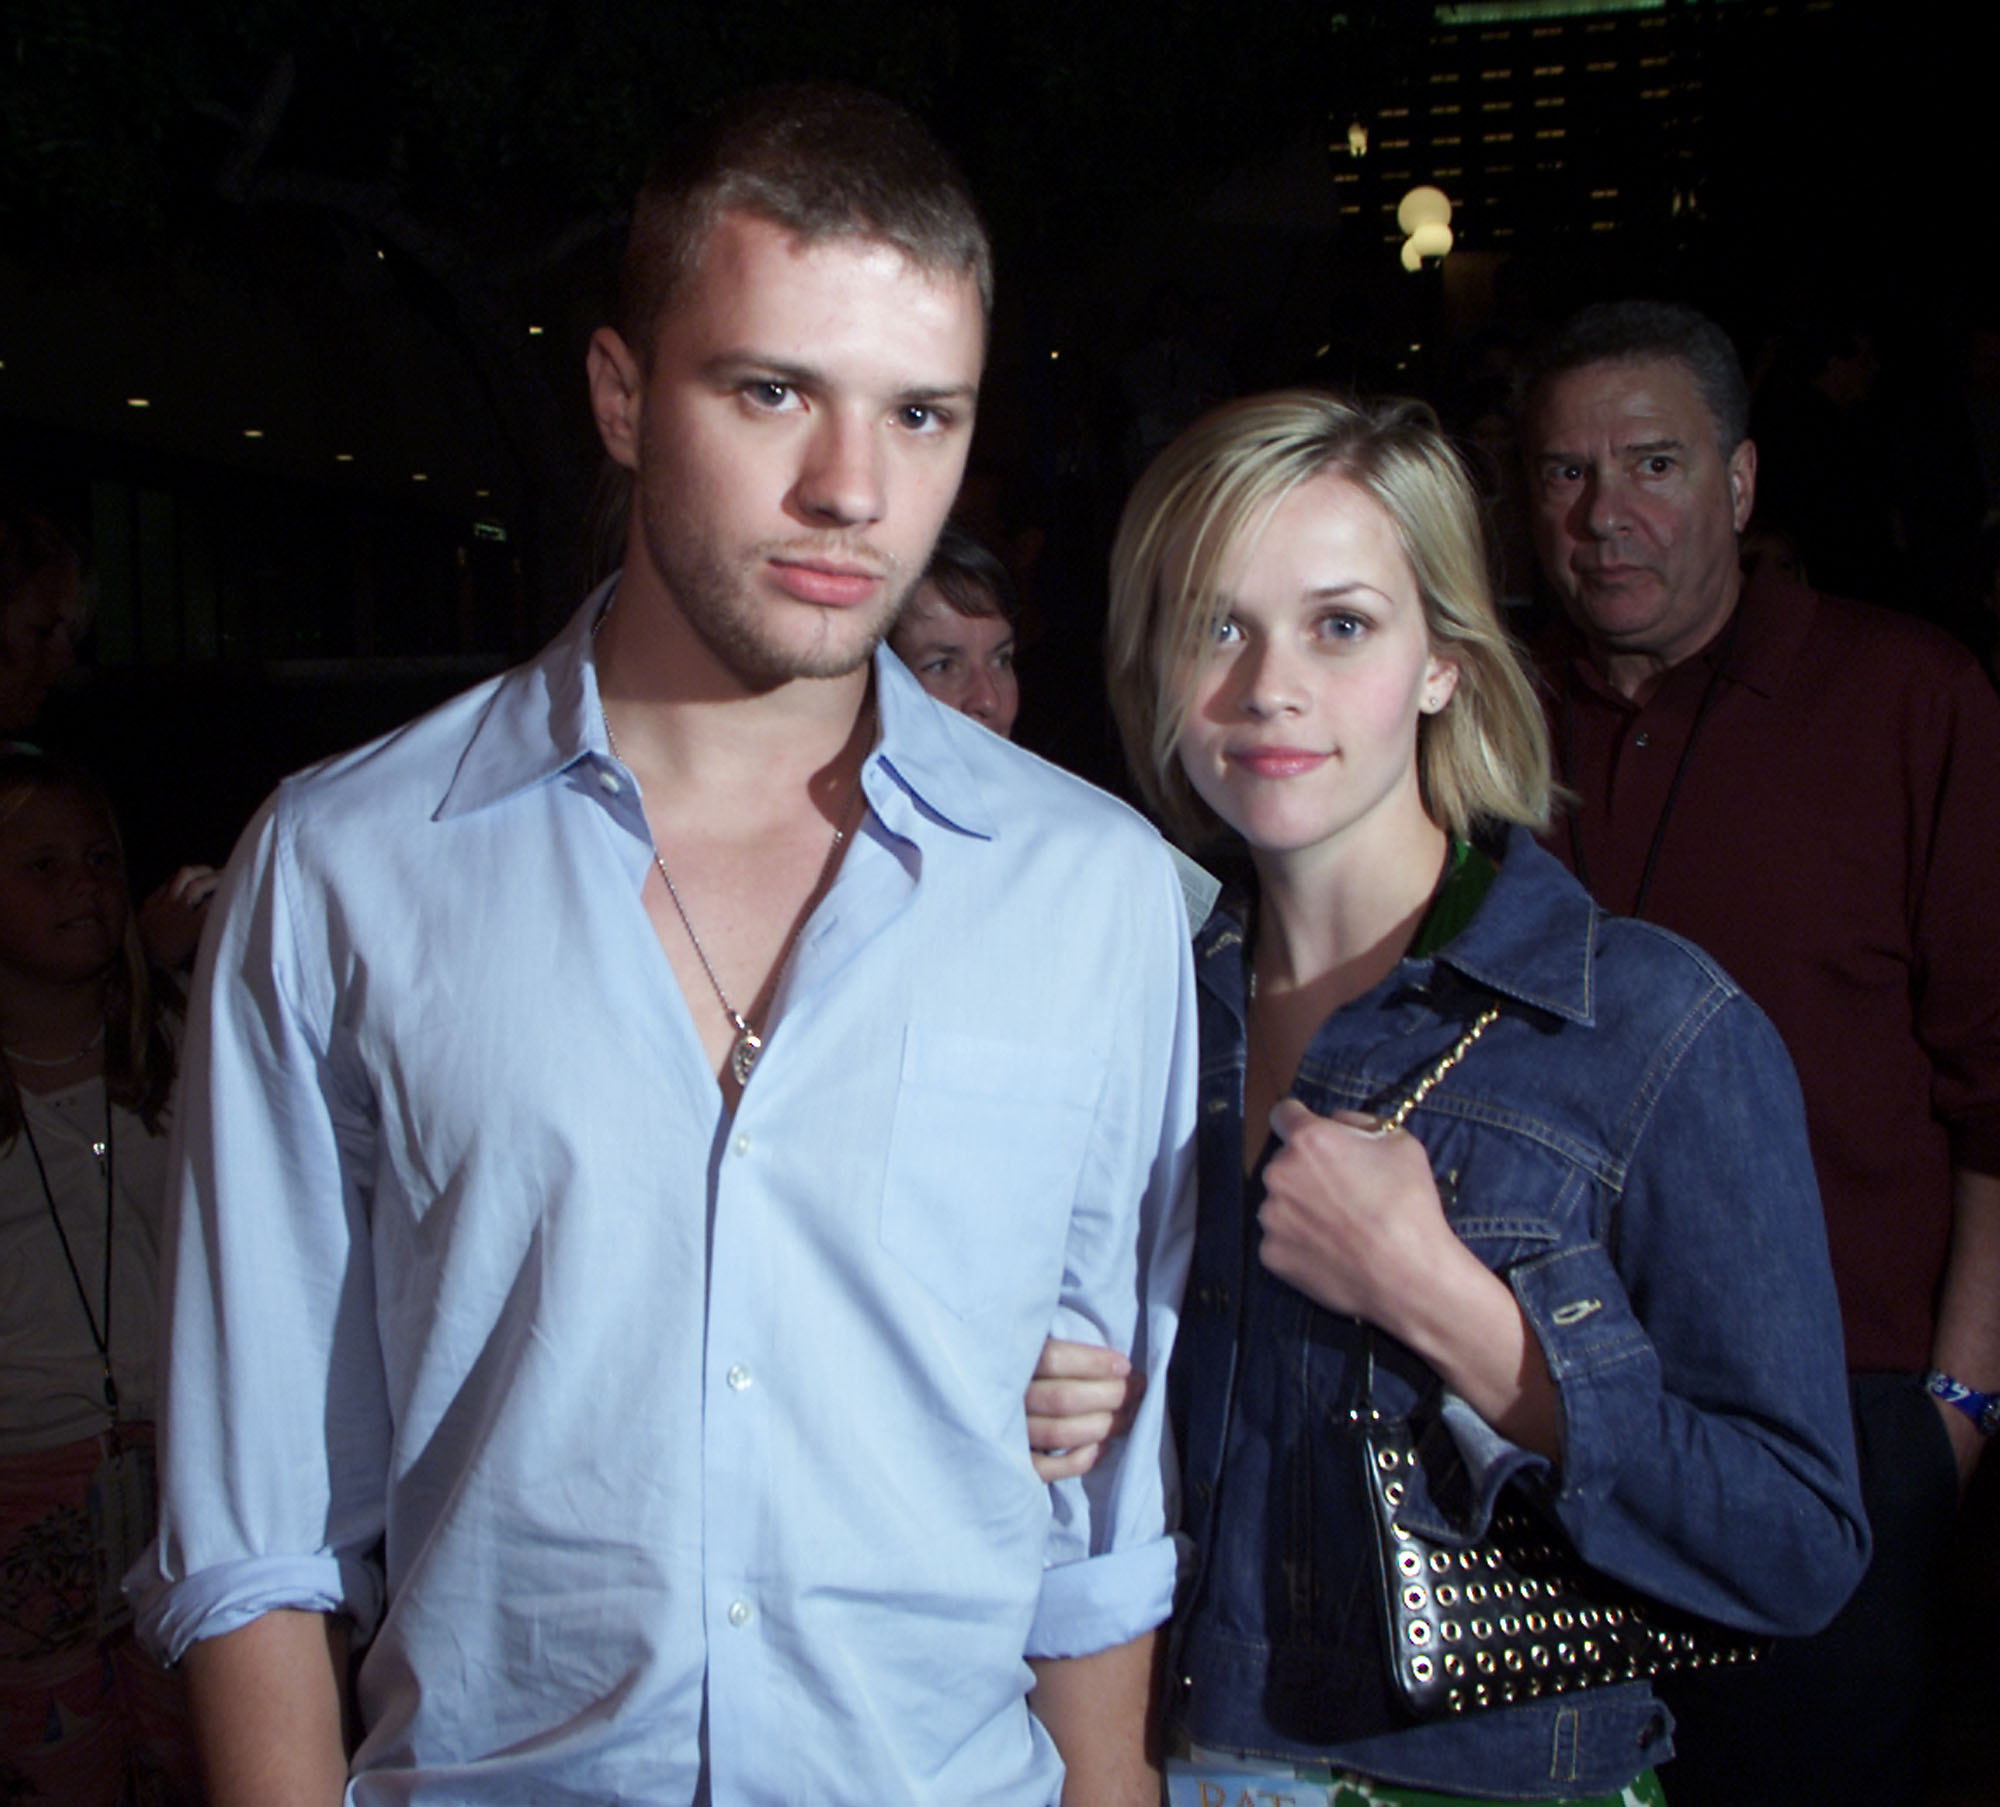 Ryan Phillippe and Reese Witherspoon at the premiere of "Rat Race" at the Cineplex Odeon Century Plaza in Los Angeles on July 30, 2001 | Source: Getty Images